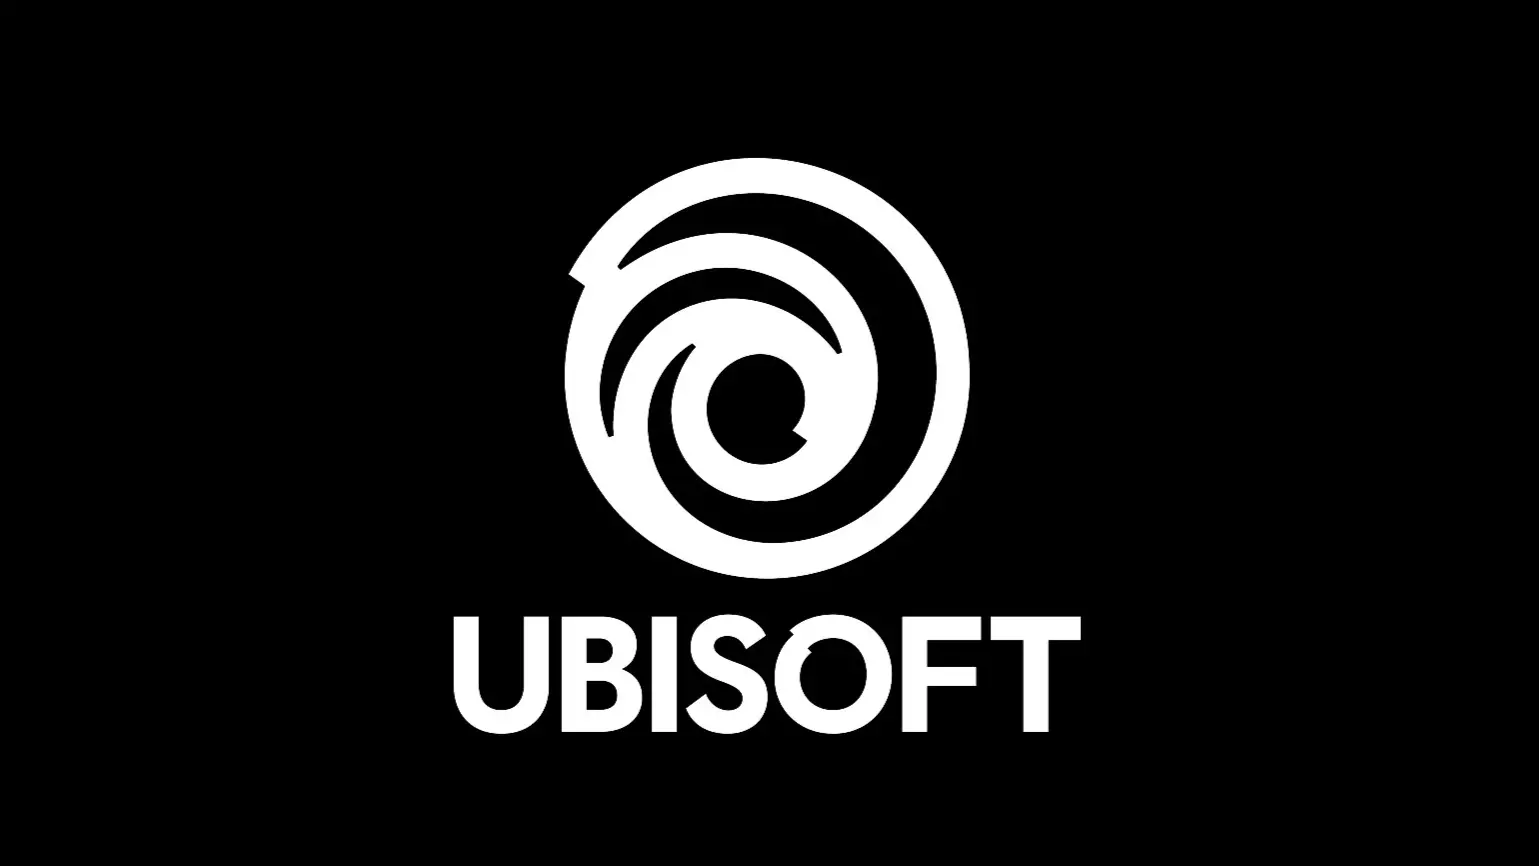 25% of Ubisoft Employees Have Witnessed Or Experienced Workplace Misconduct